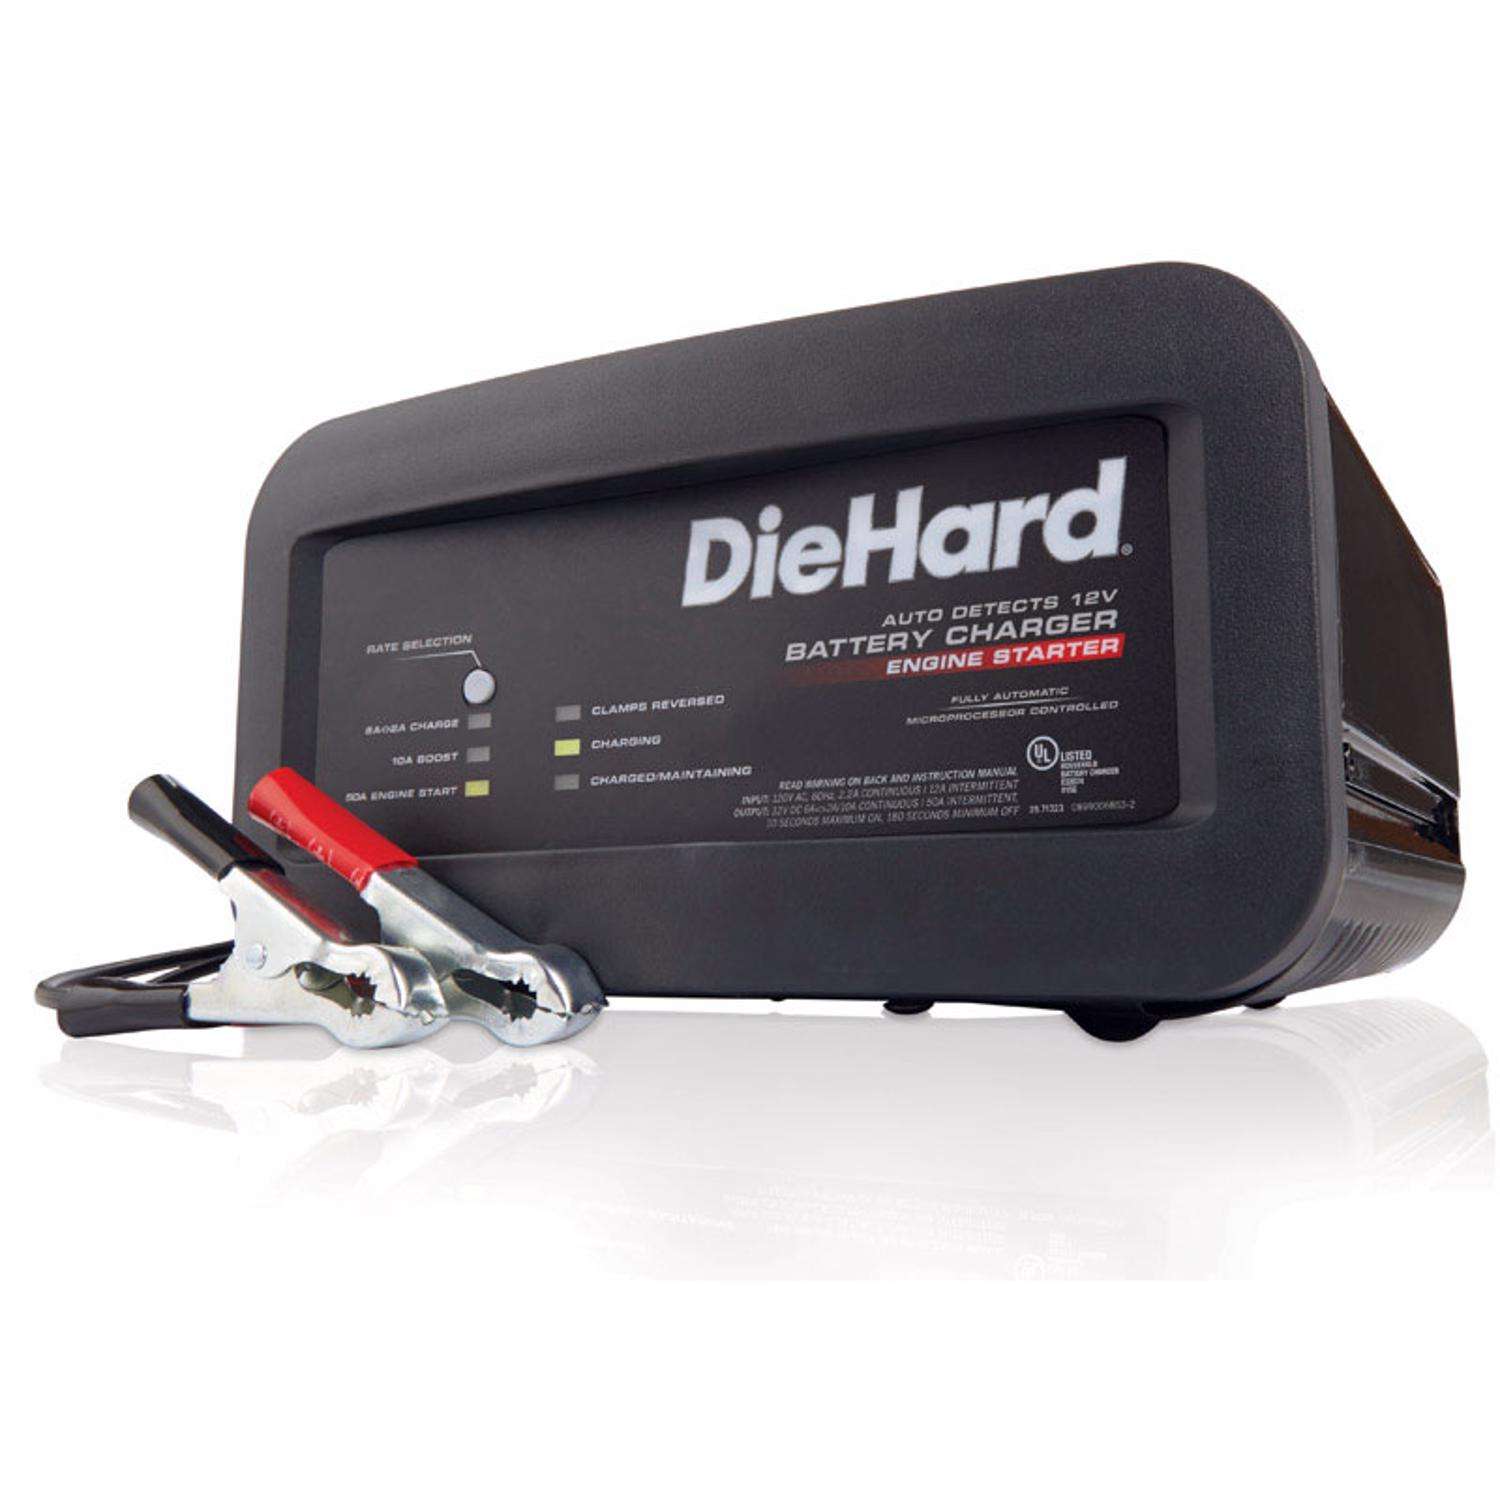 DieHard Automatic 12 V 6 amps Battery Charger - Ace Hardware